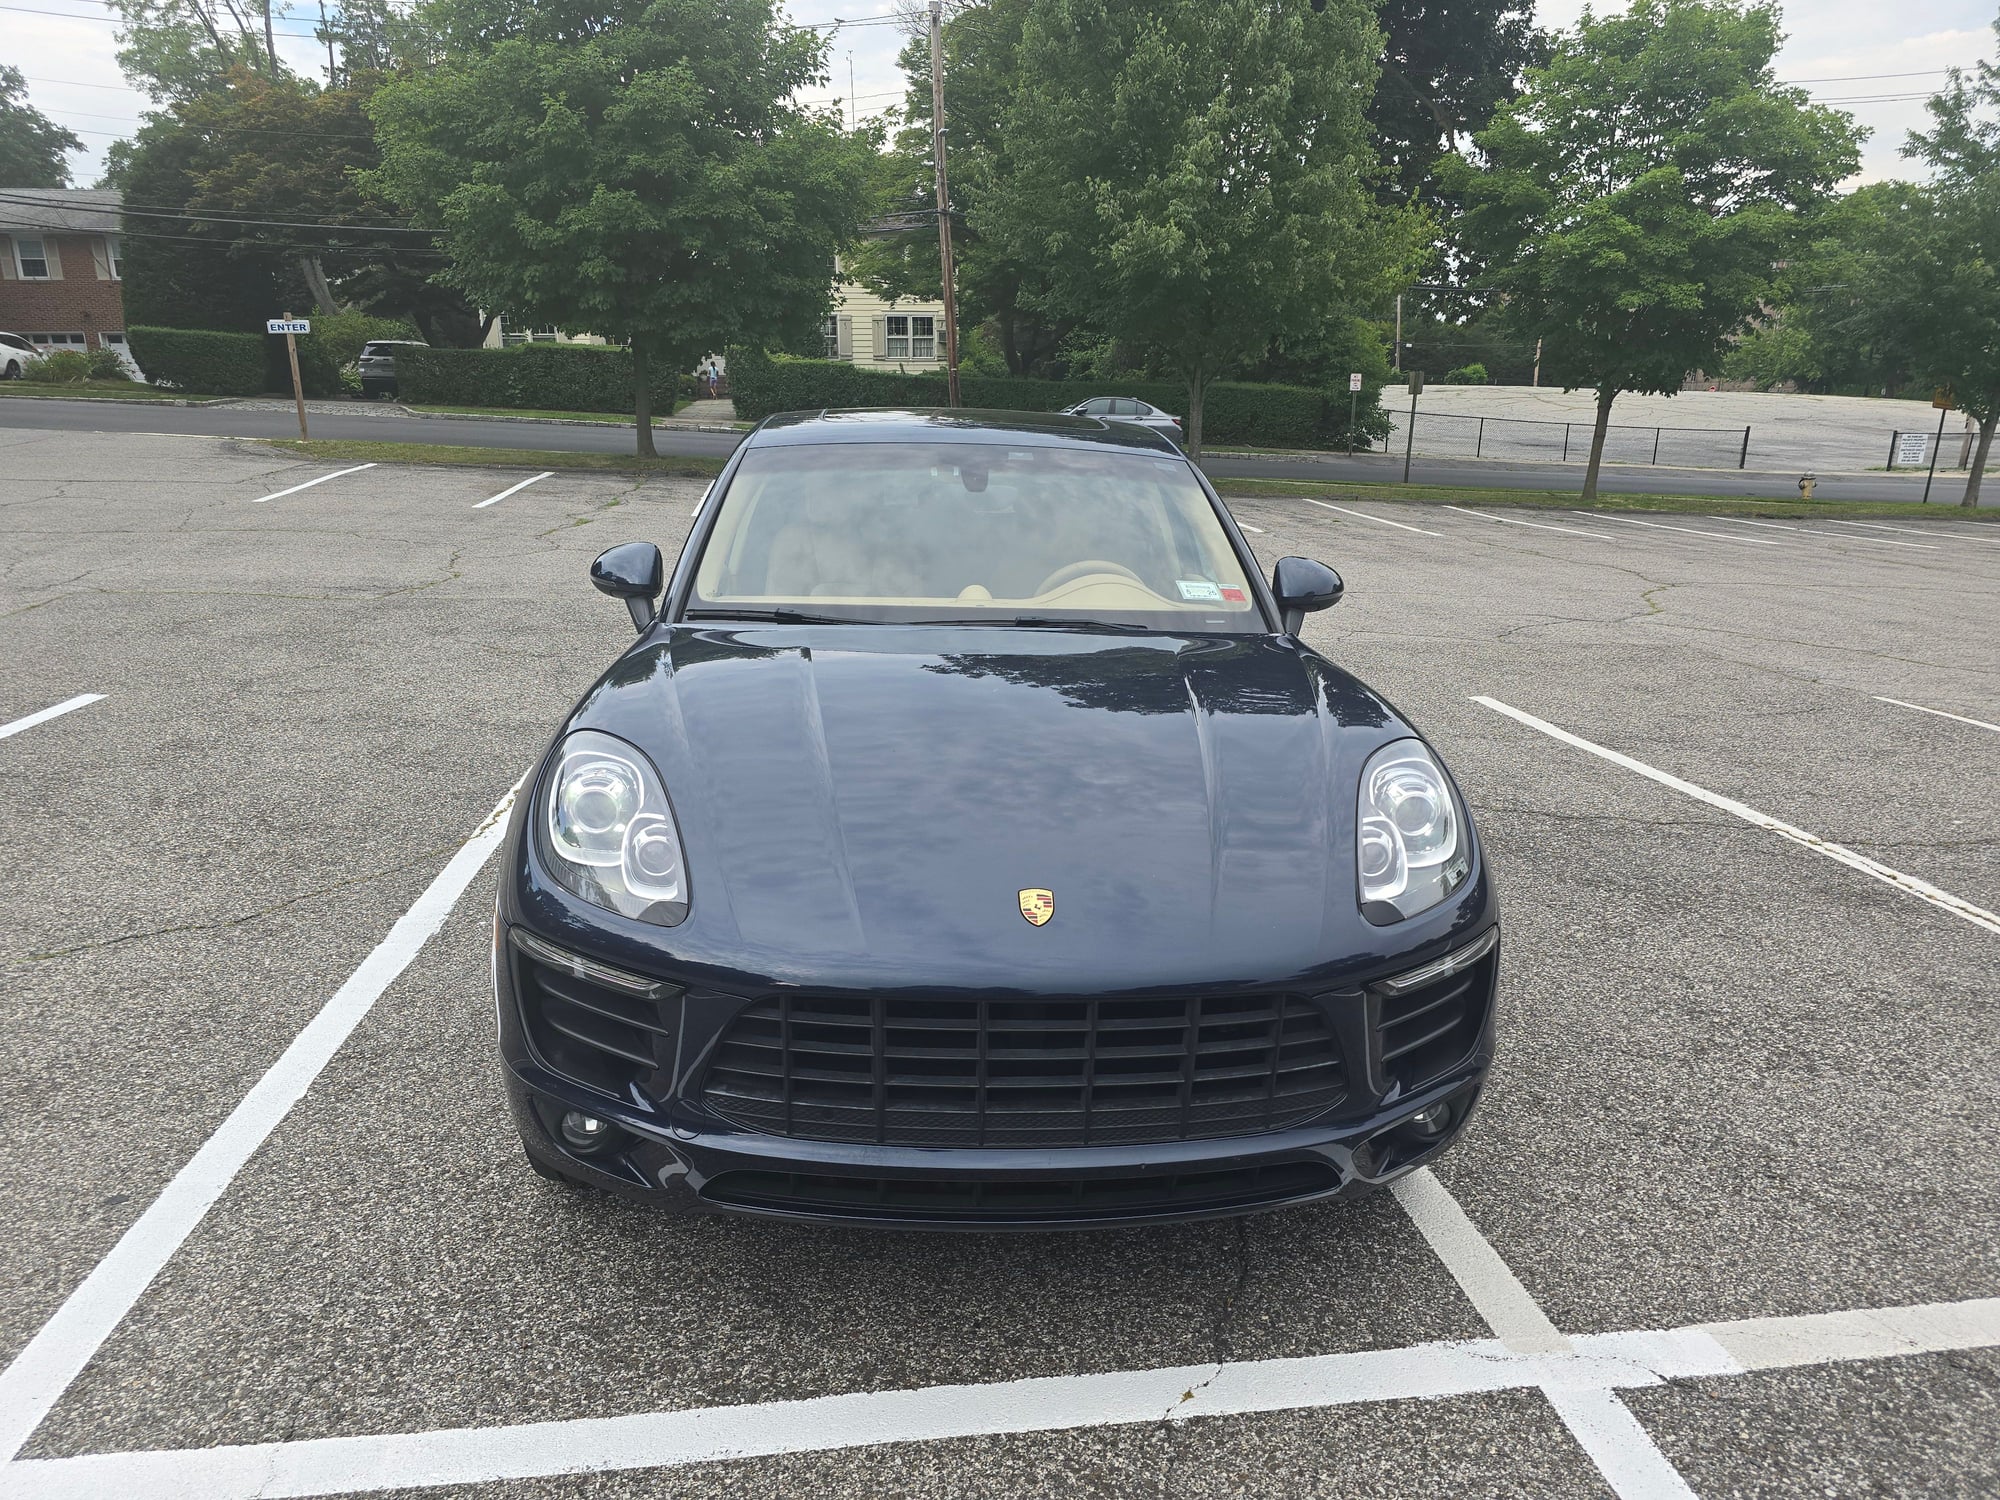 2015 Porsche Macan - 2015 Macan S One Owner Clean - Used - VIN WP1AB2A55FLB70266 - 69,700 Miles - 6 cyl - AWD - Automatic - SUV - Blue - Larchmont, NY 10538, United States